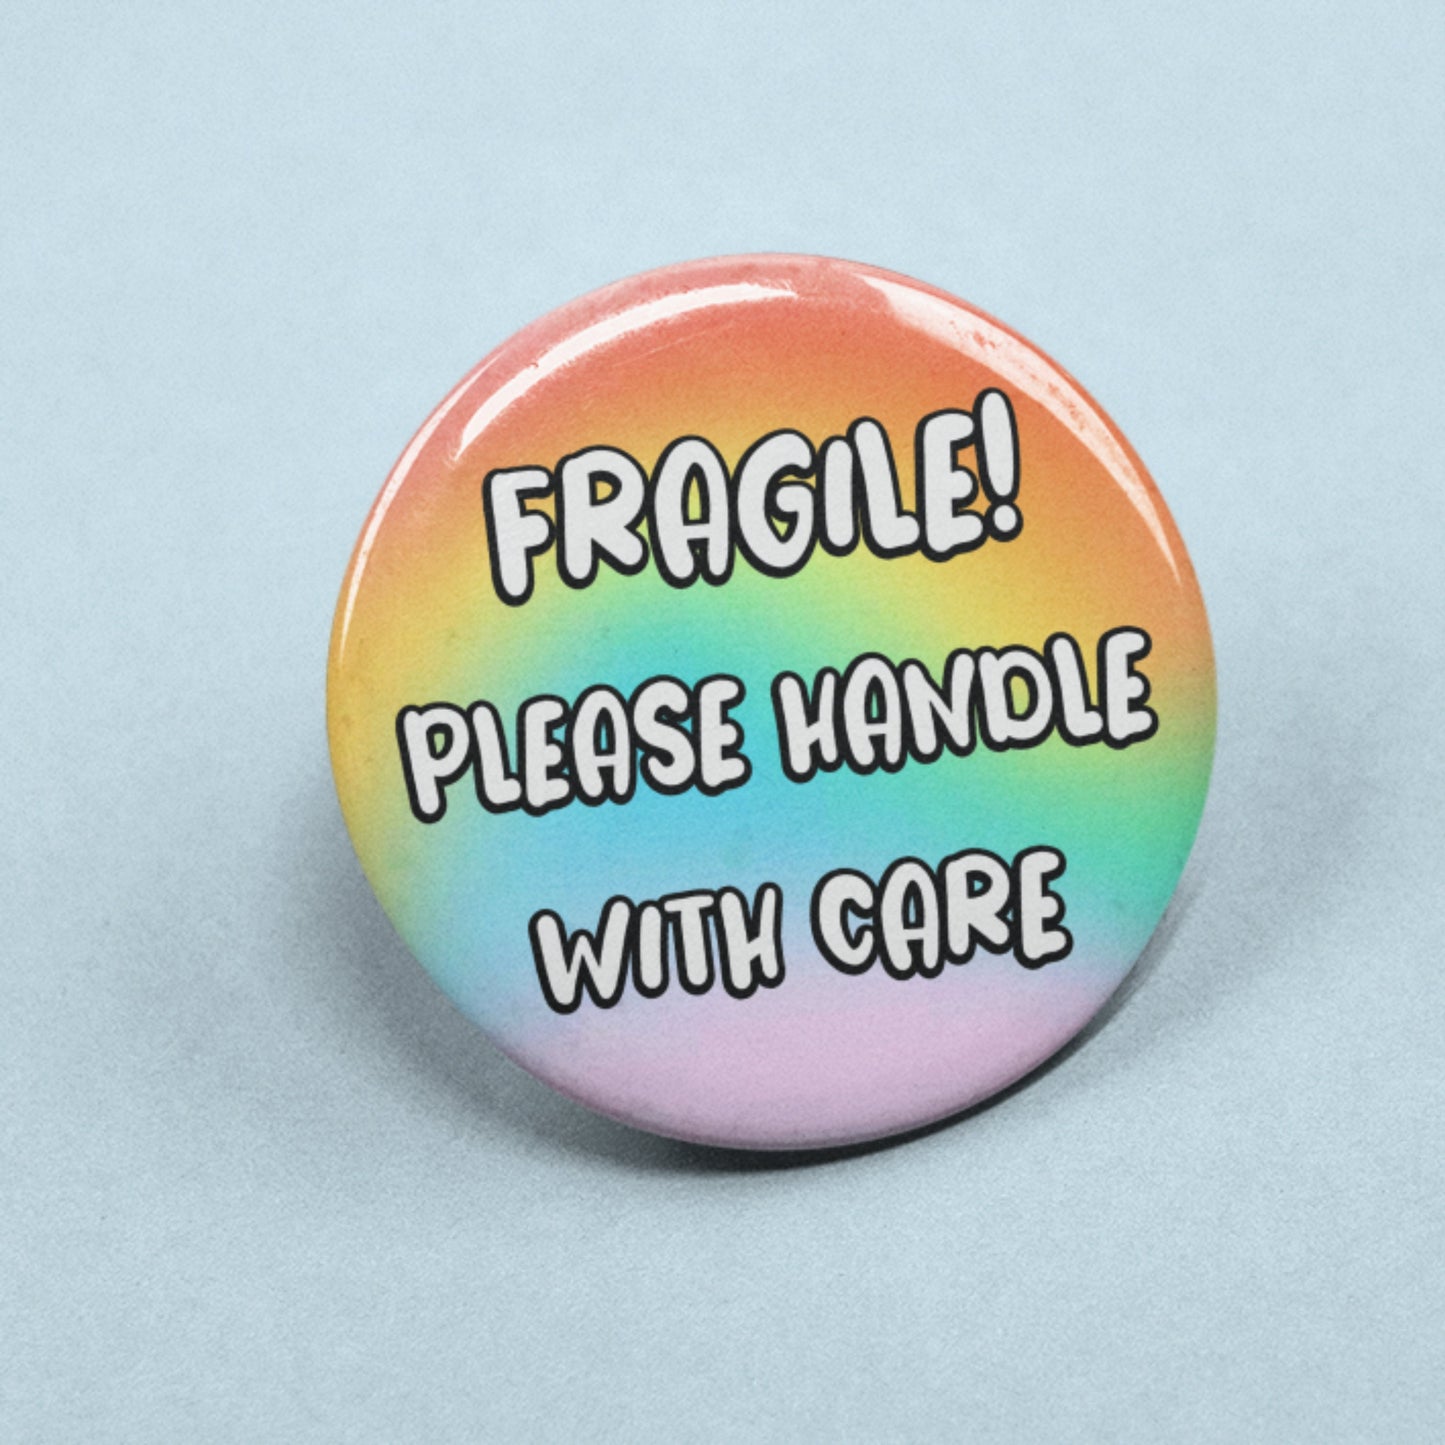 Fragile! Please Handle With Care - Badge Pin | Friendship Gifts, Positive Gift, Pins